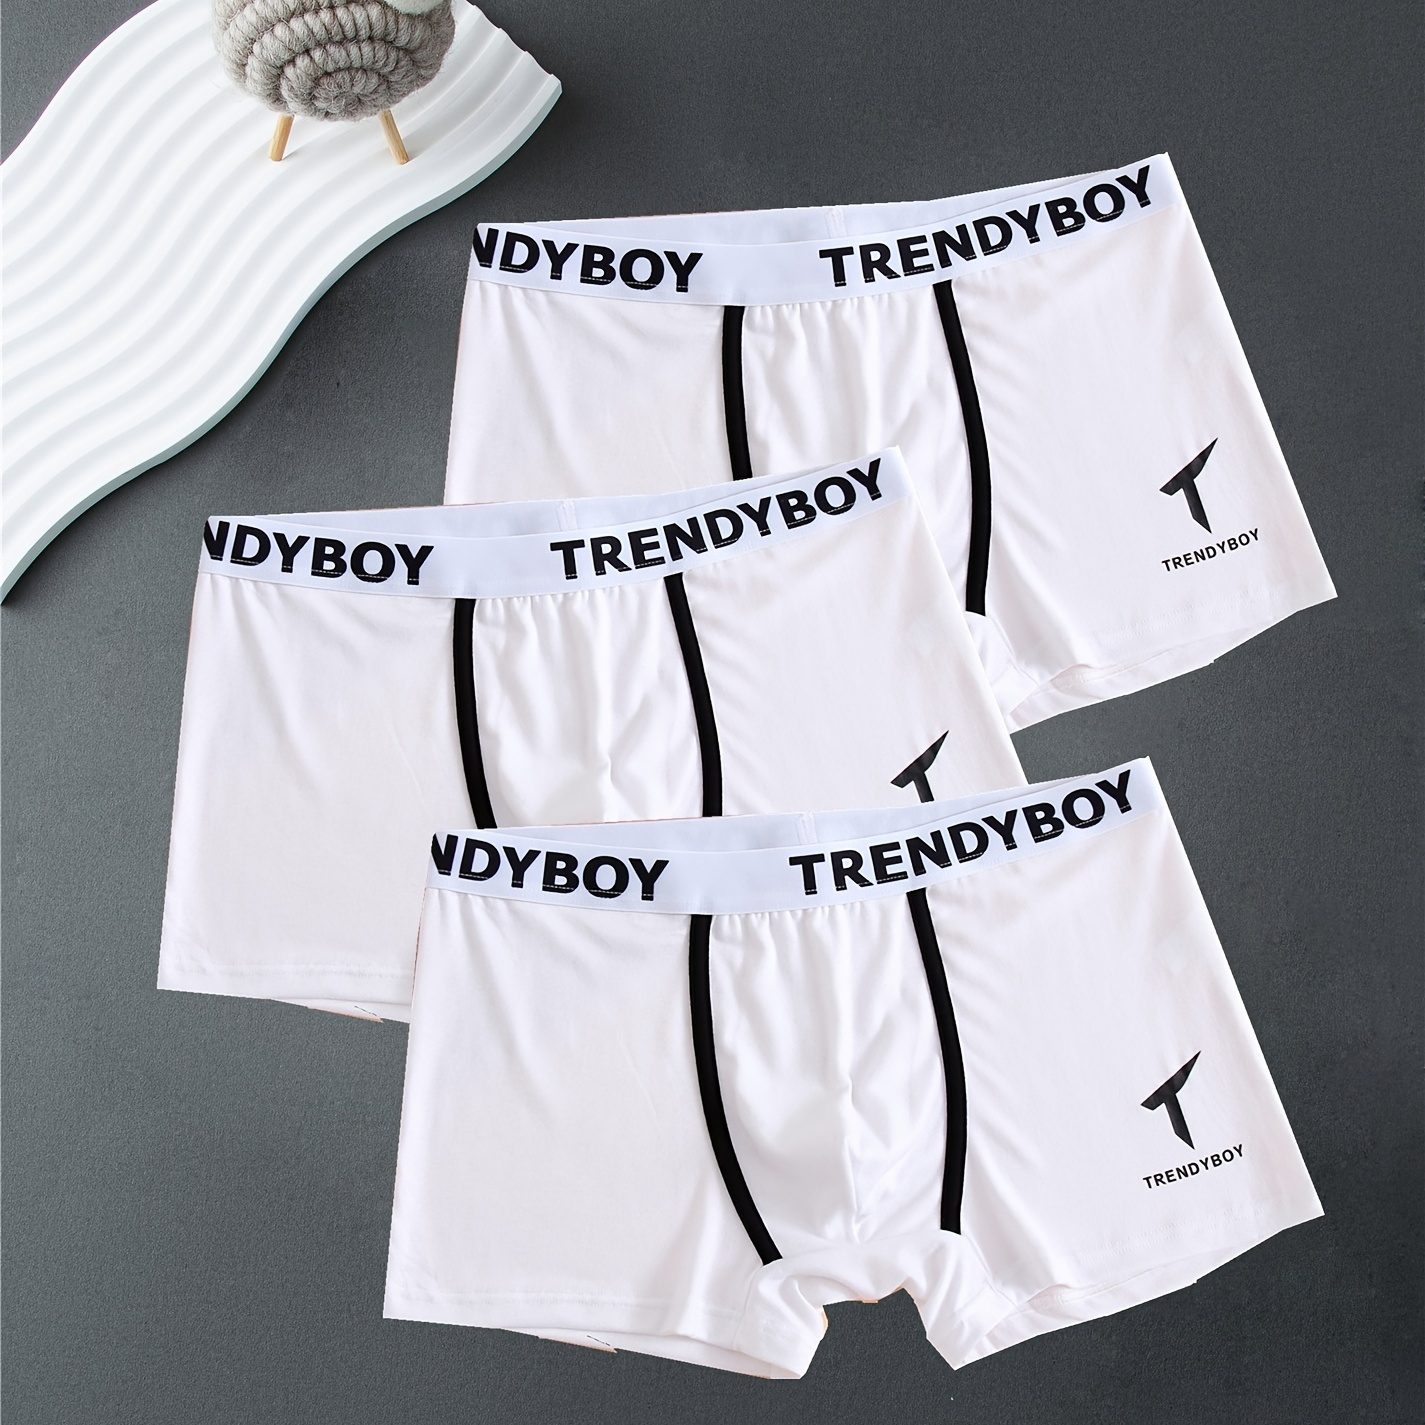 

3pcs Men's Cotton Antibacterial Underwear, Casual Boxer Briefs Shorts, Breathable Comfy Stretchy Boxer Trunks, Sports Shorts